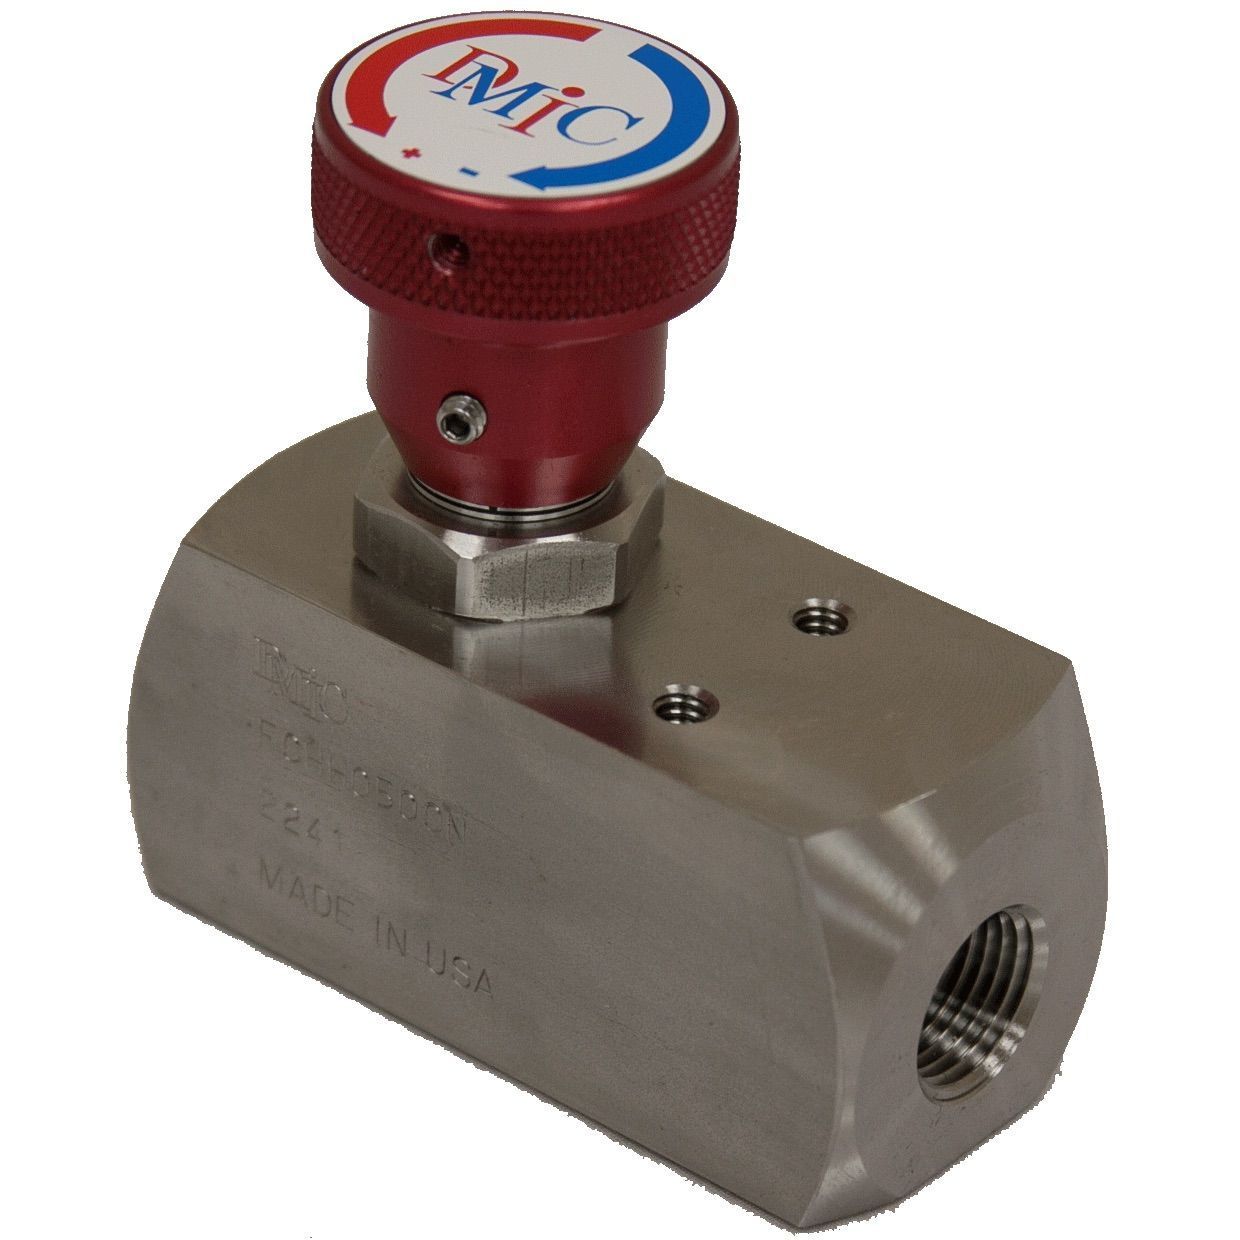 FCHH-0500N-2221 : DMIC Flow Control, Unidirectional, with Integrated Check, 1/2" NPT, 316SS, 10000psi